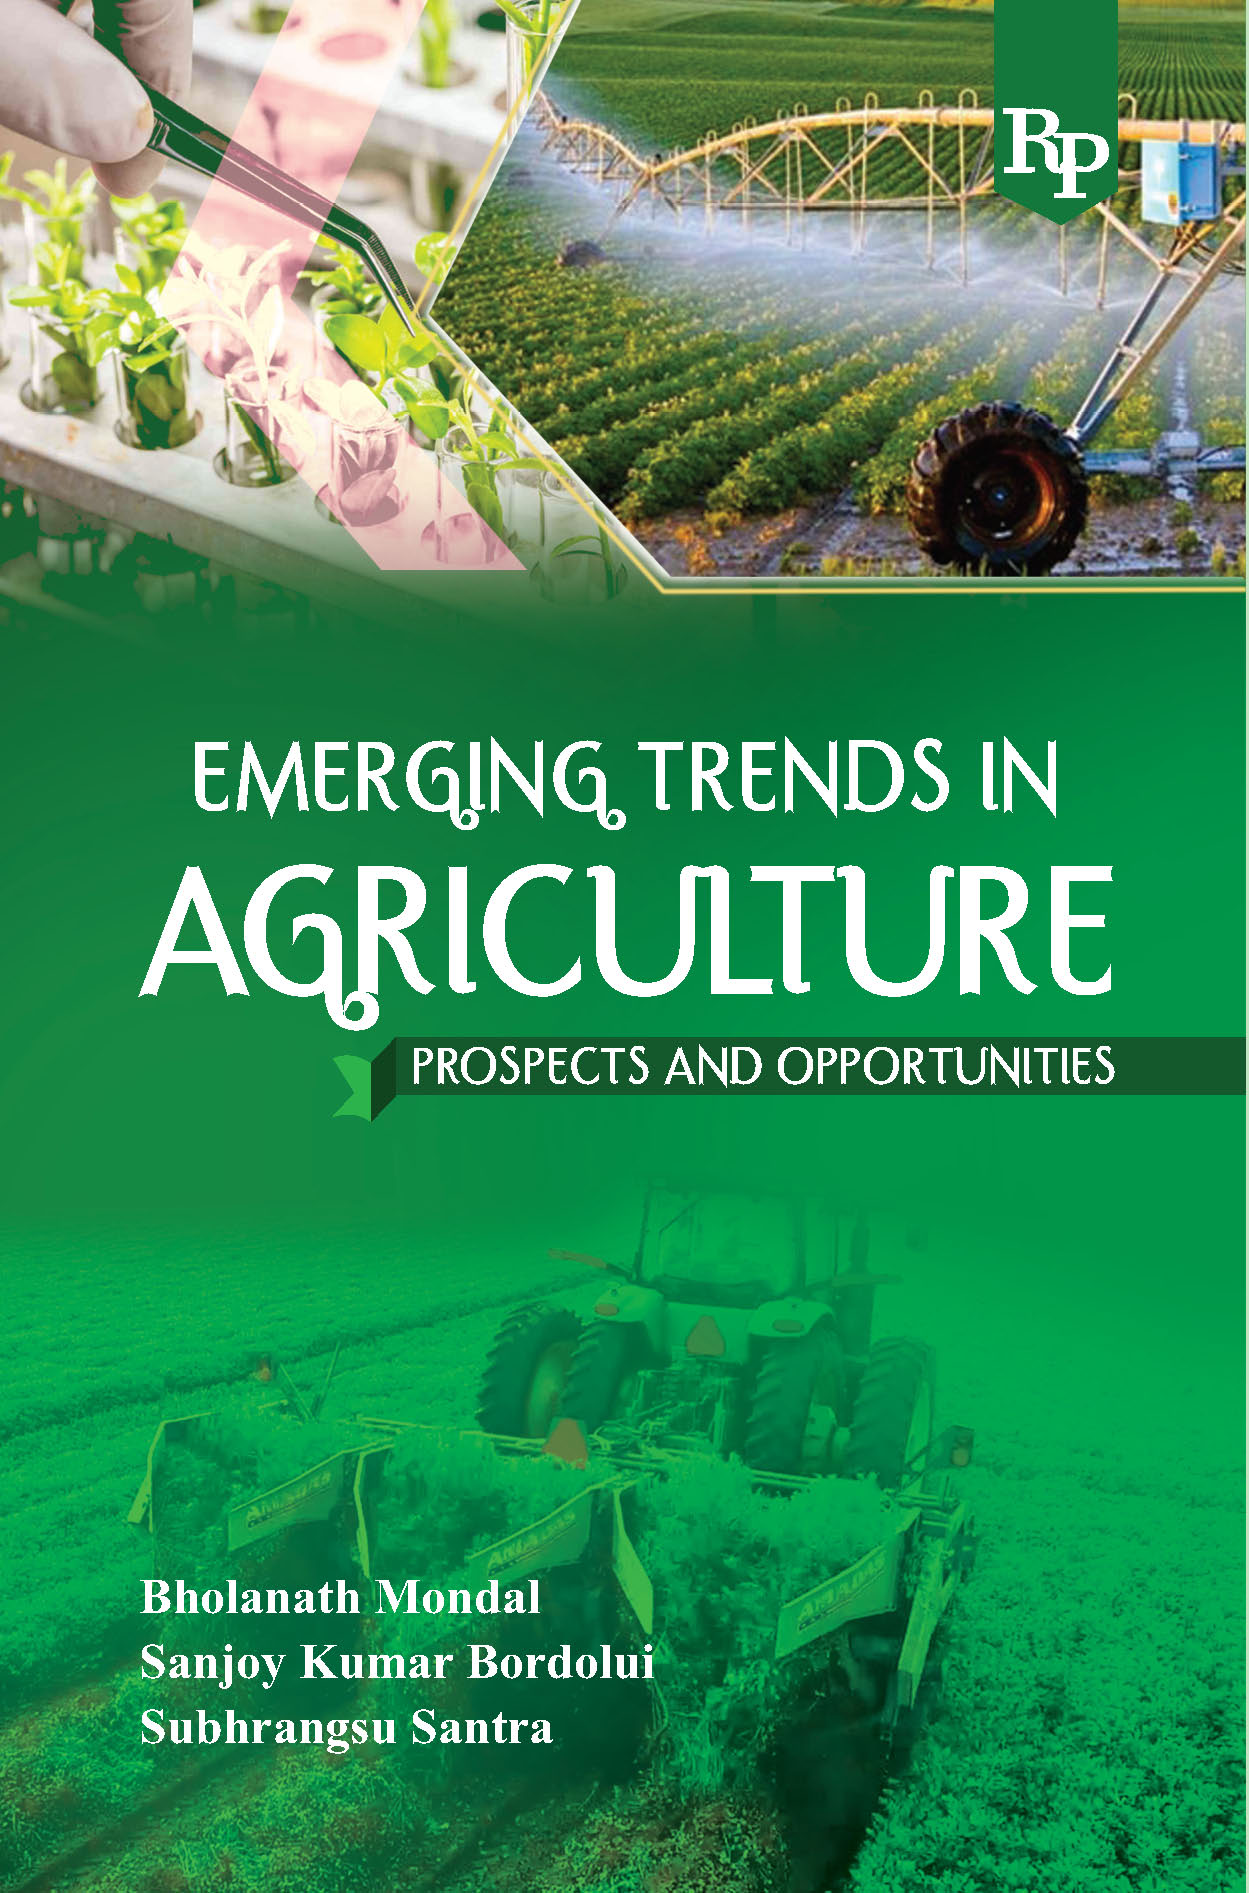 Emerging Trends in Agriculture-Prospectus and Opportunities Cover.jpg